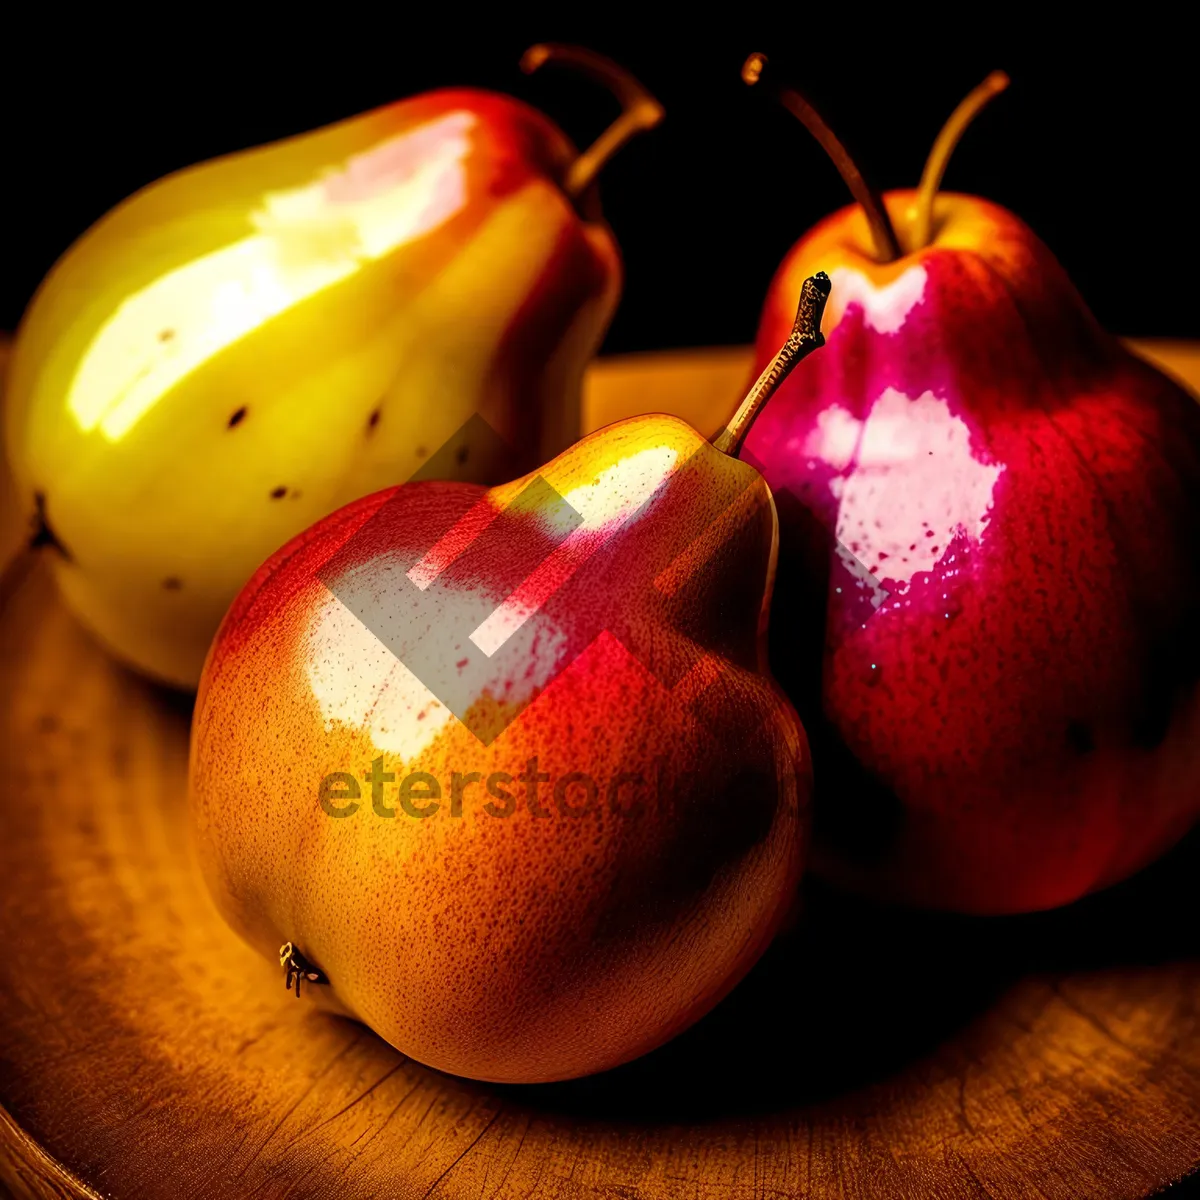 Picture of Vibrant Fruits: Apple, Pear, Banana, Nectarine, and Orange